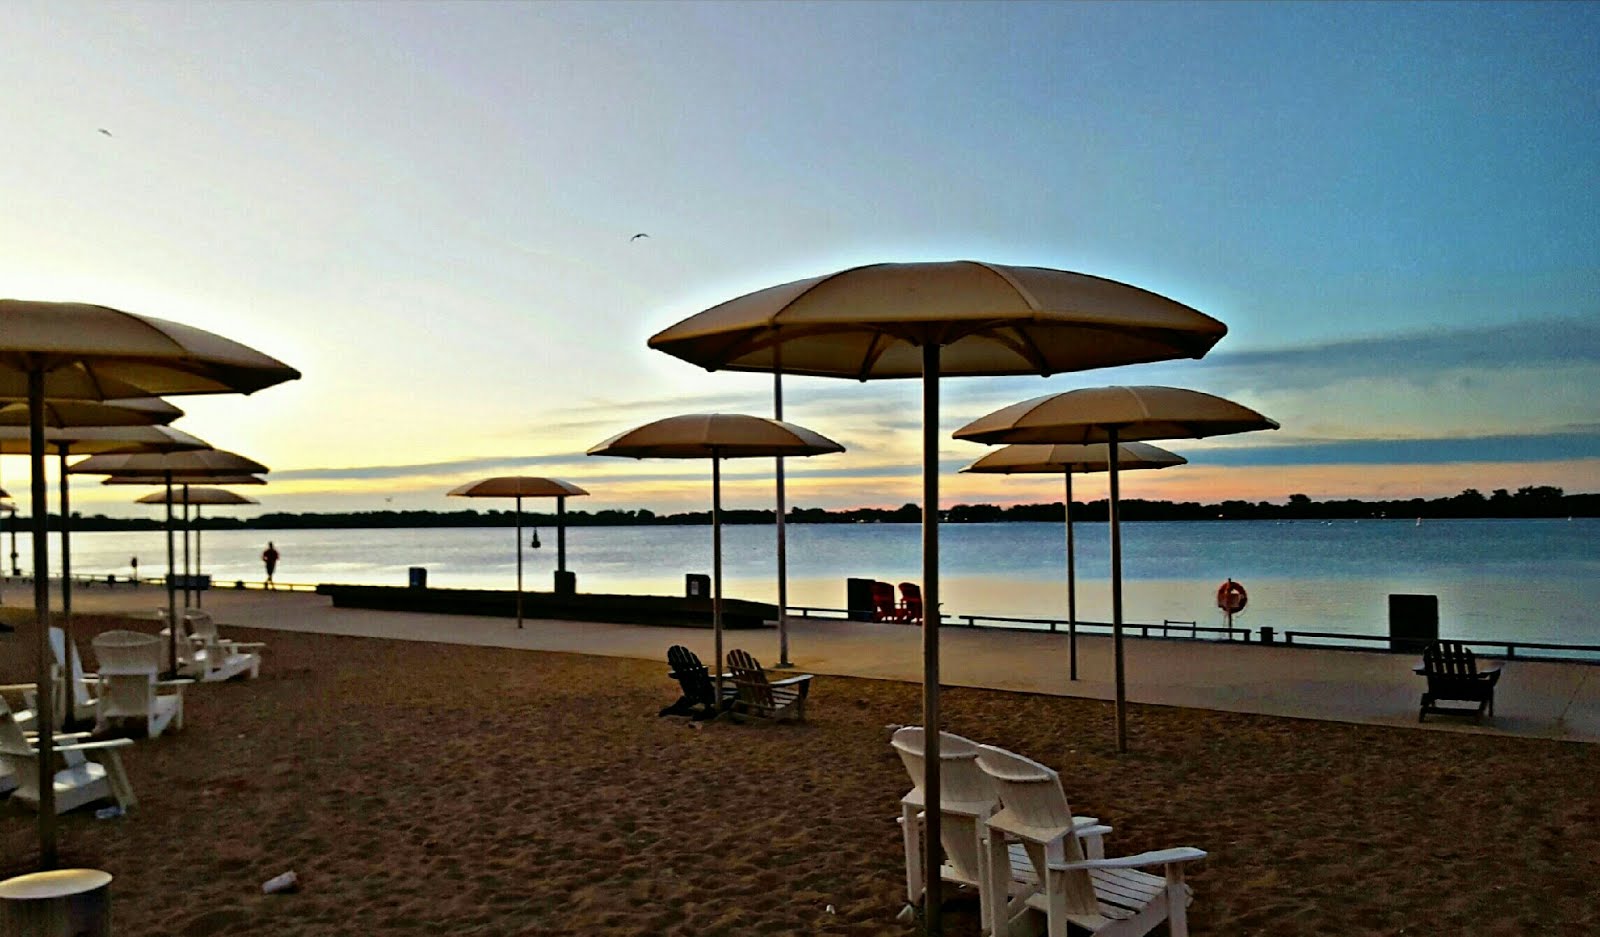 Catch The Sunset At H20 Park • 6:45 Is A Great Time For A Jog • A Book And A Coffee Perhaps...